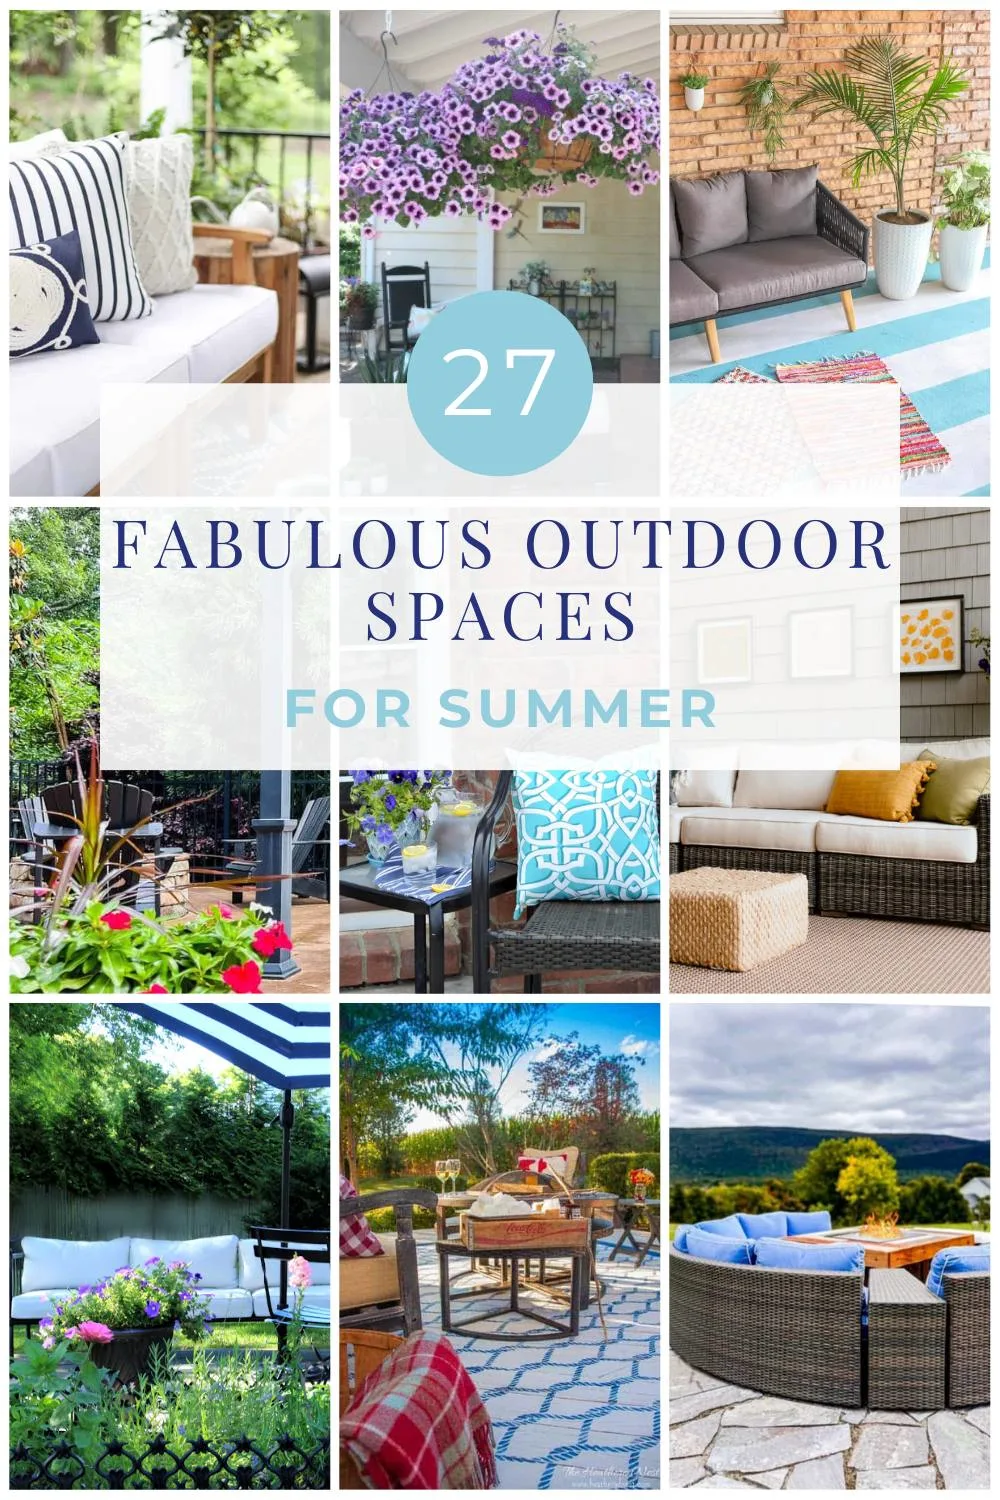 9 image collage with home decorating ideas for summer.